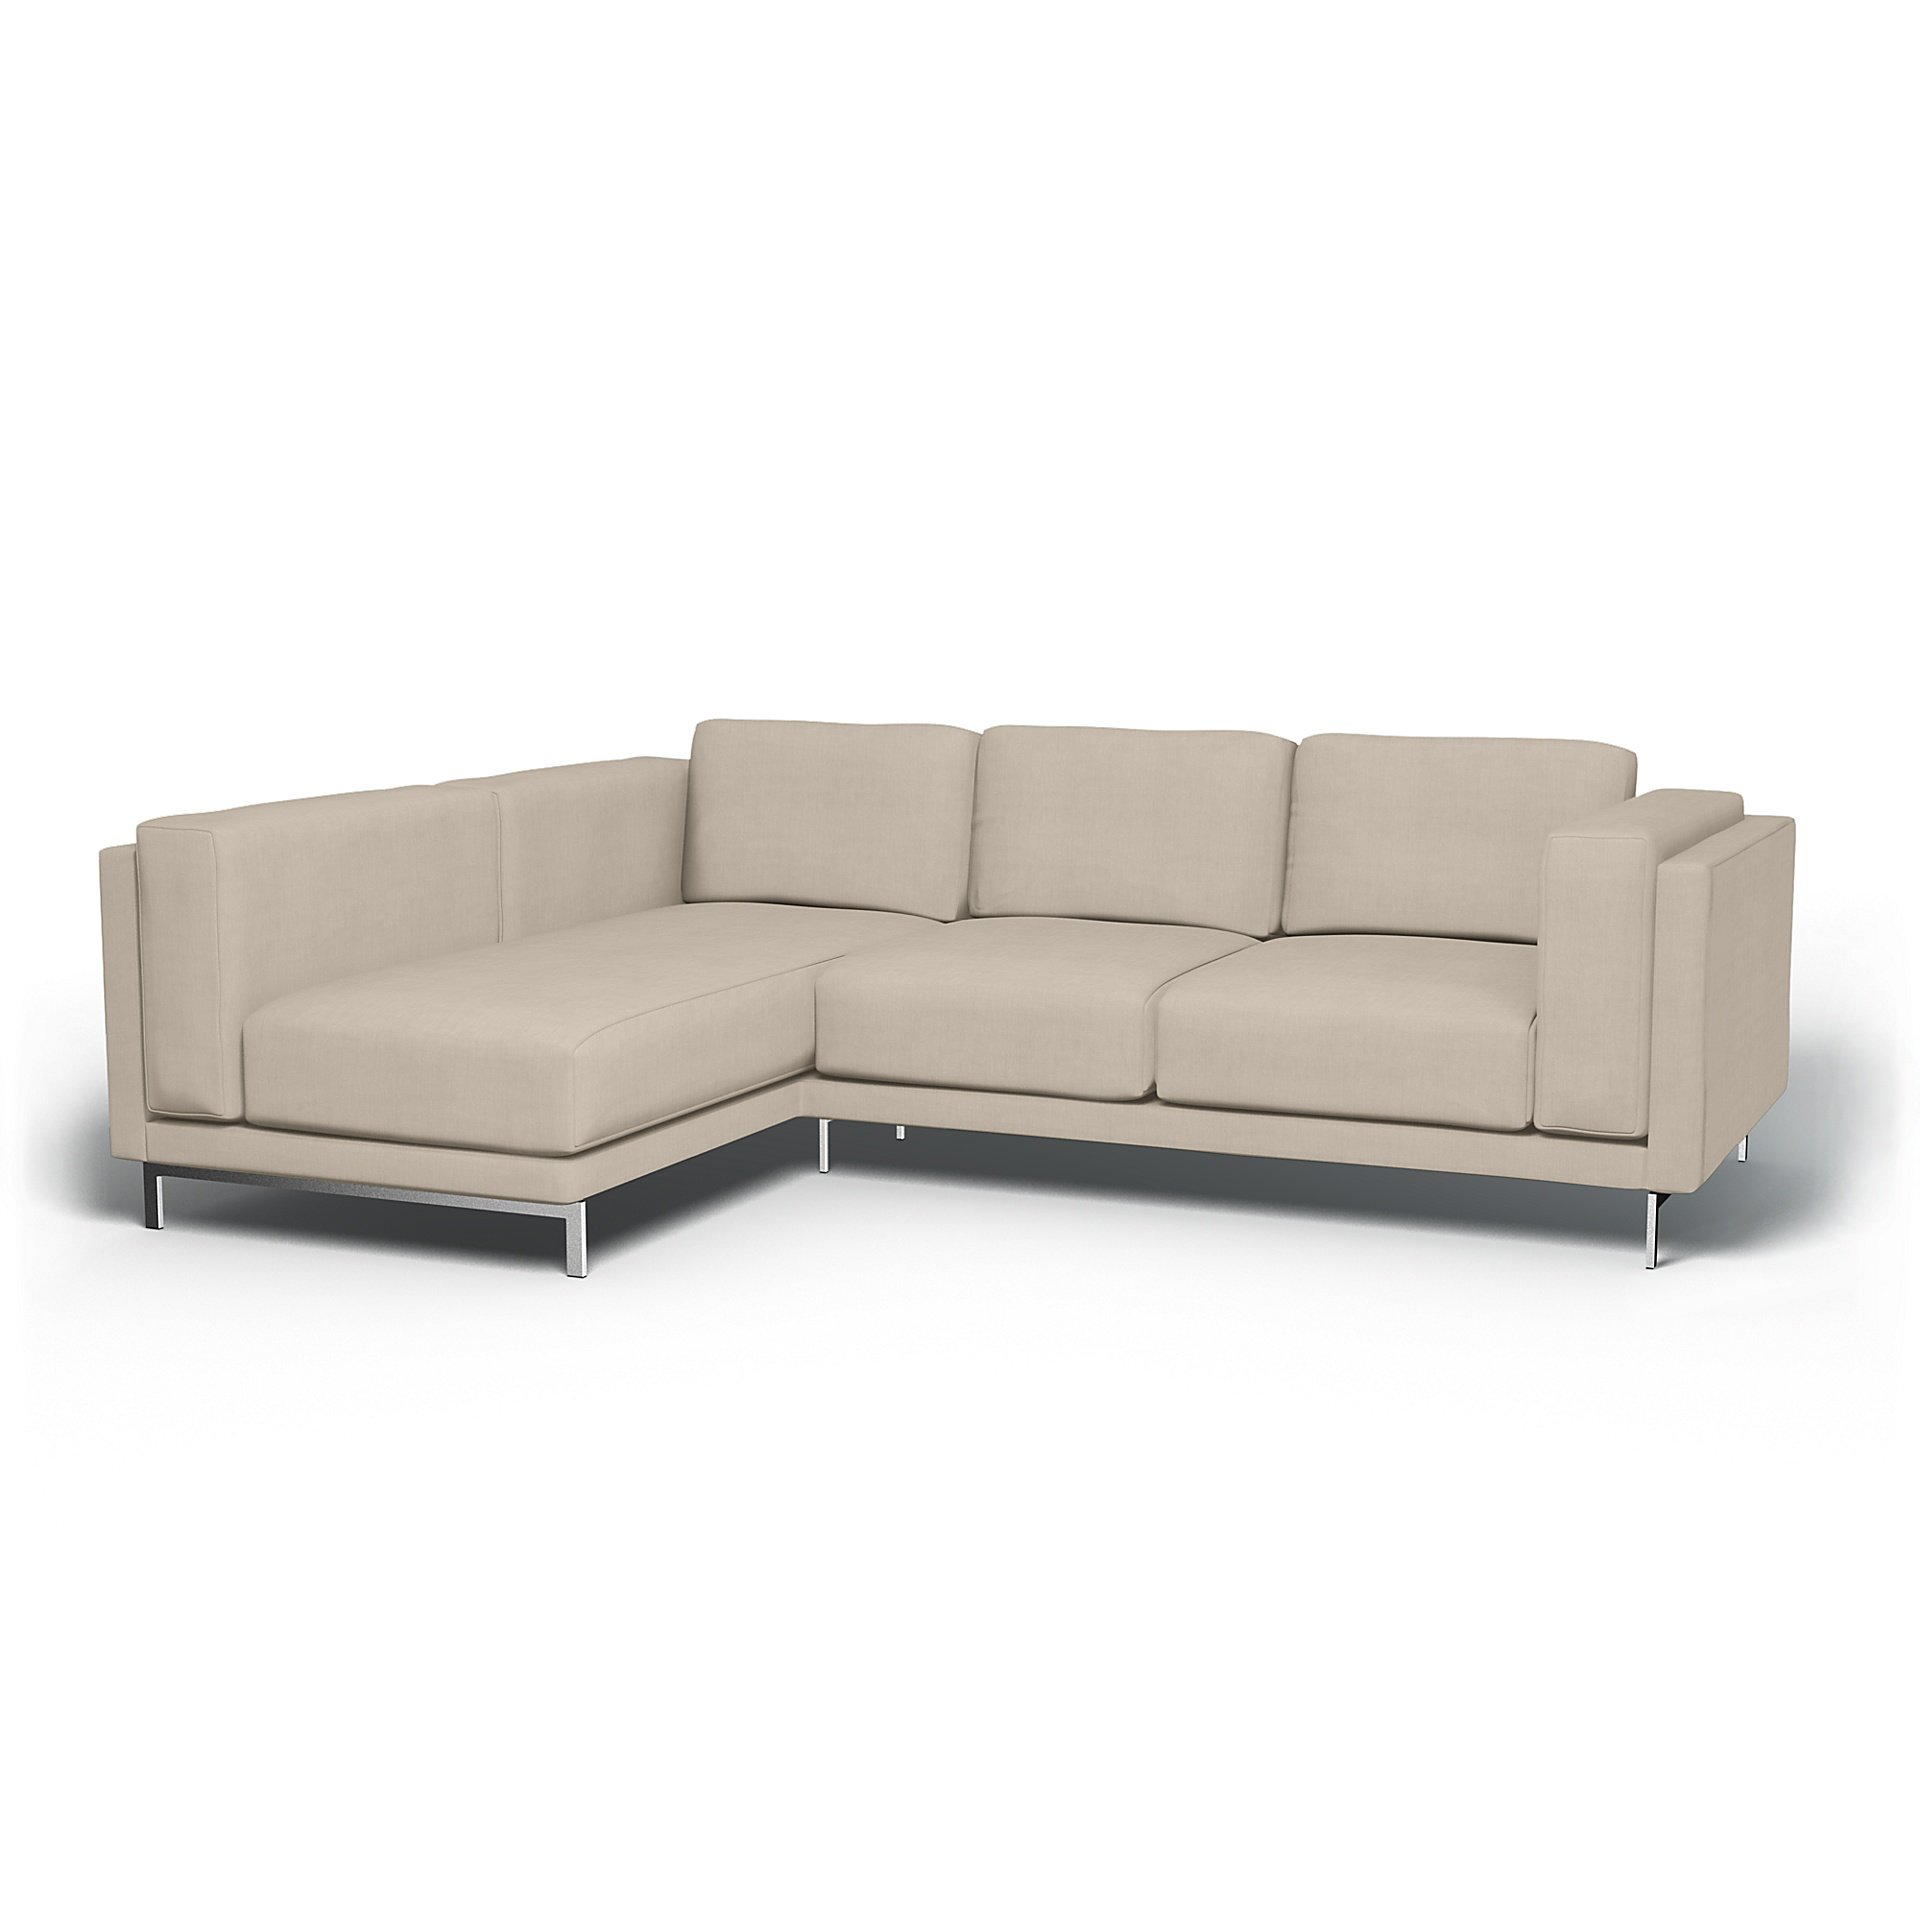 IKEA - Nockeby 3 Seater Sofa with Left Chaise Cover, Parchment, Linen - Bemz